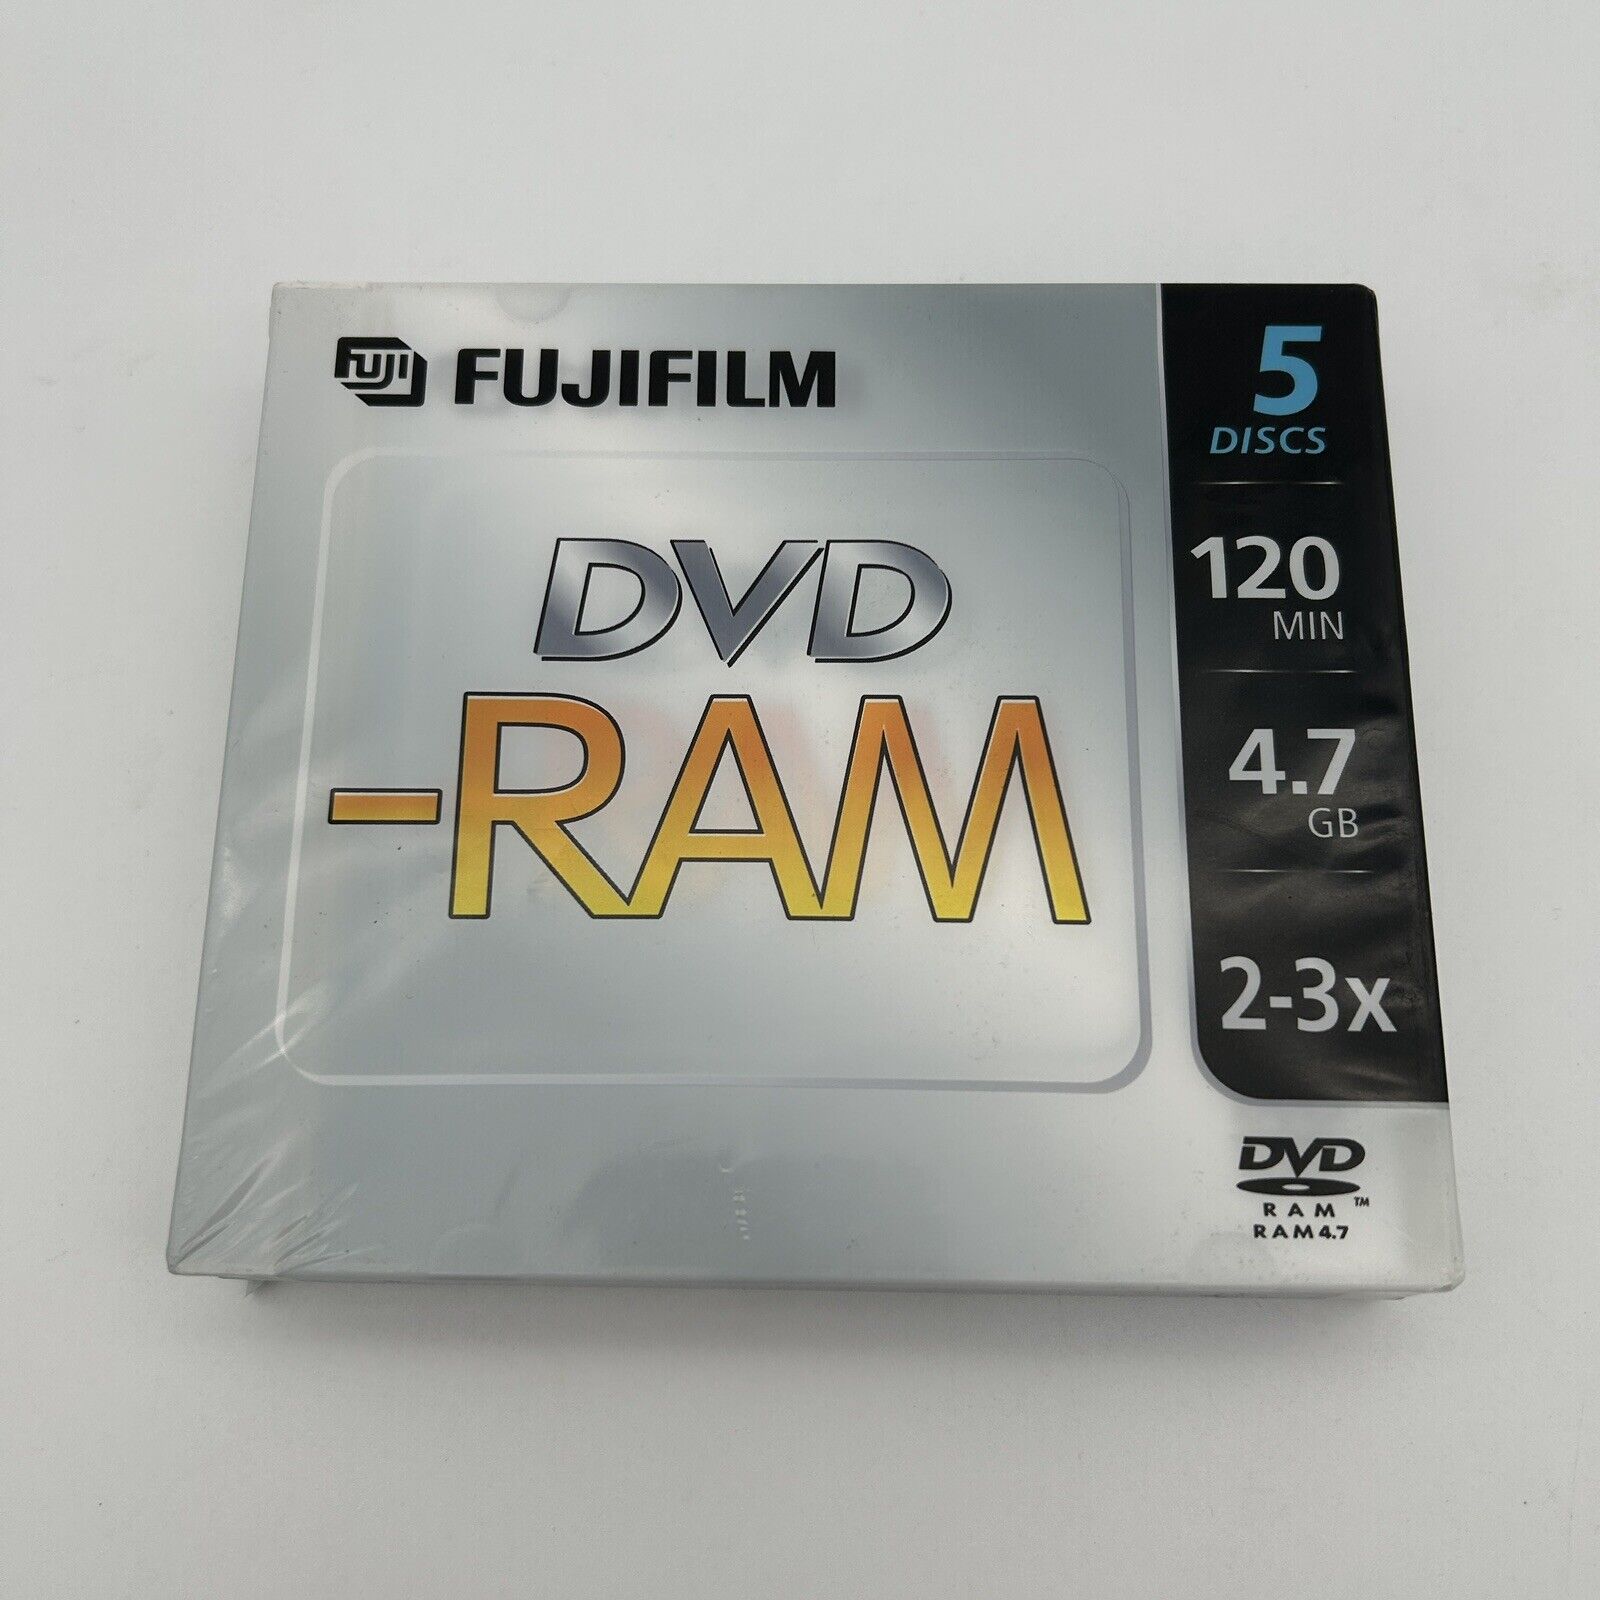 Fujifilm 5 Pack DVD-RAM 120 Minute, 4.7 GB, Rewritable Disc for Data and Video